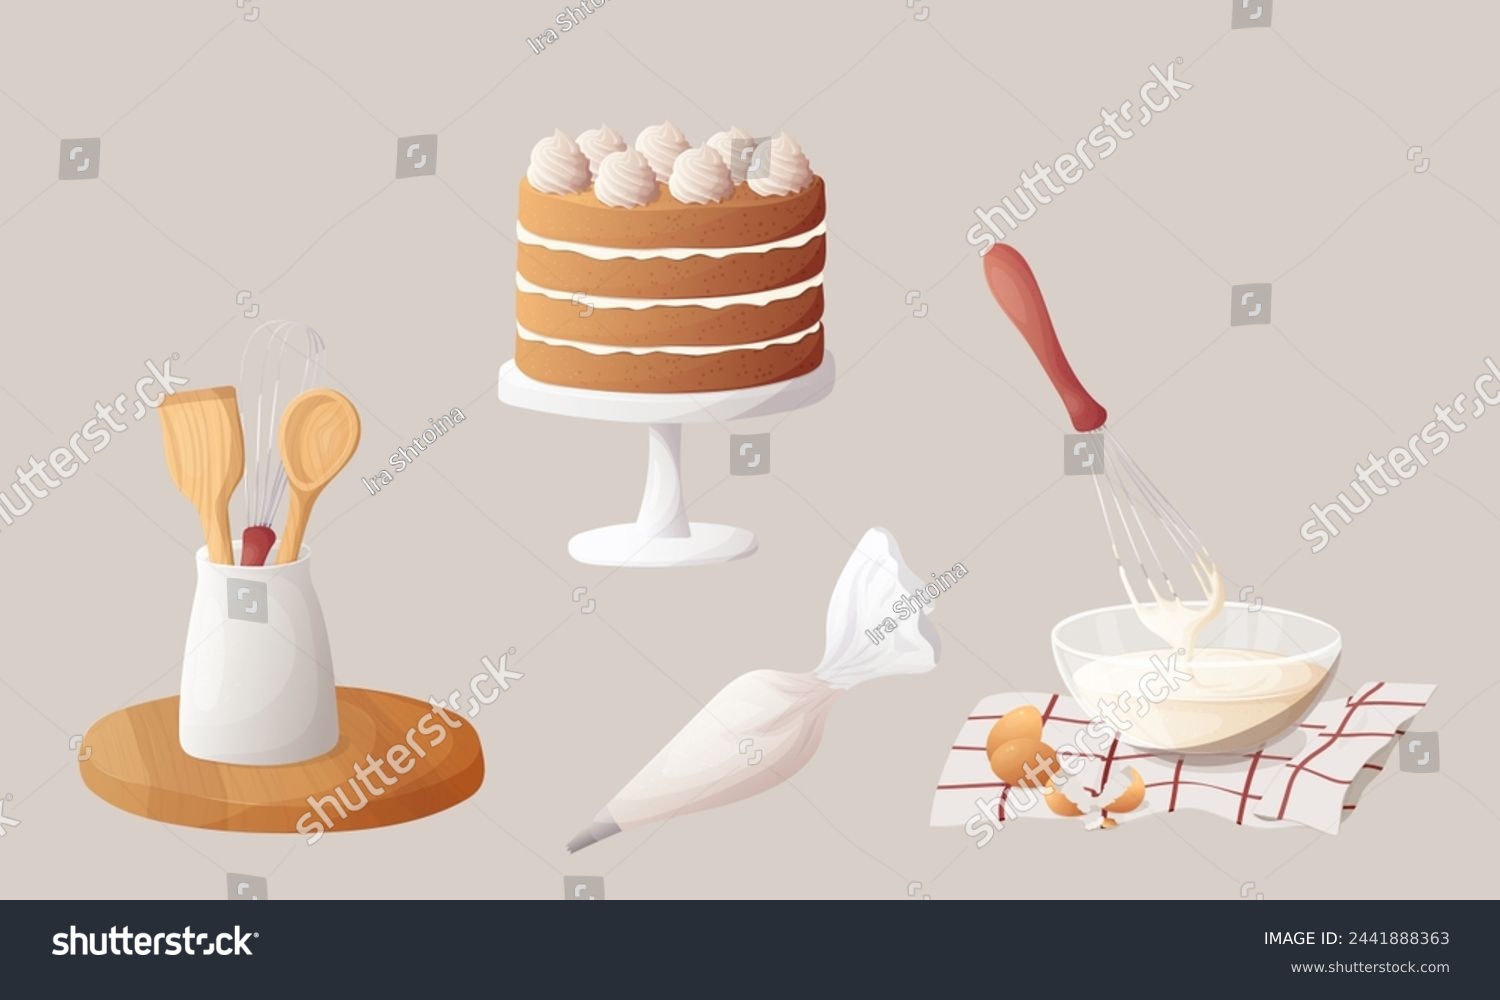 SVG of Baking set.  Cake, Mixer or whisk whipped cream, decorate cakes with cream from pastry bag. Bakery process vector illustration. Kitchenware, cooking utensil isolated on white svg